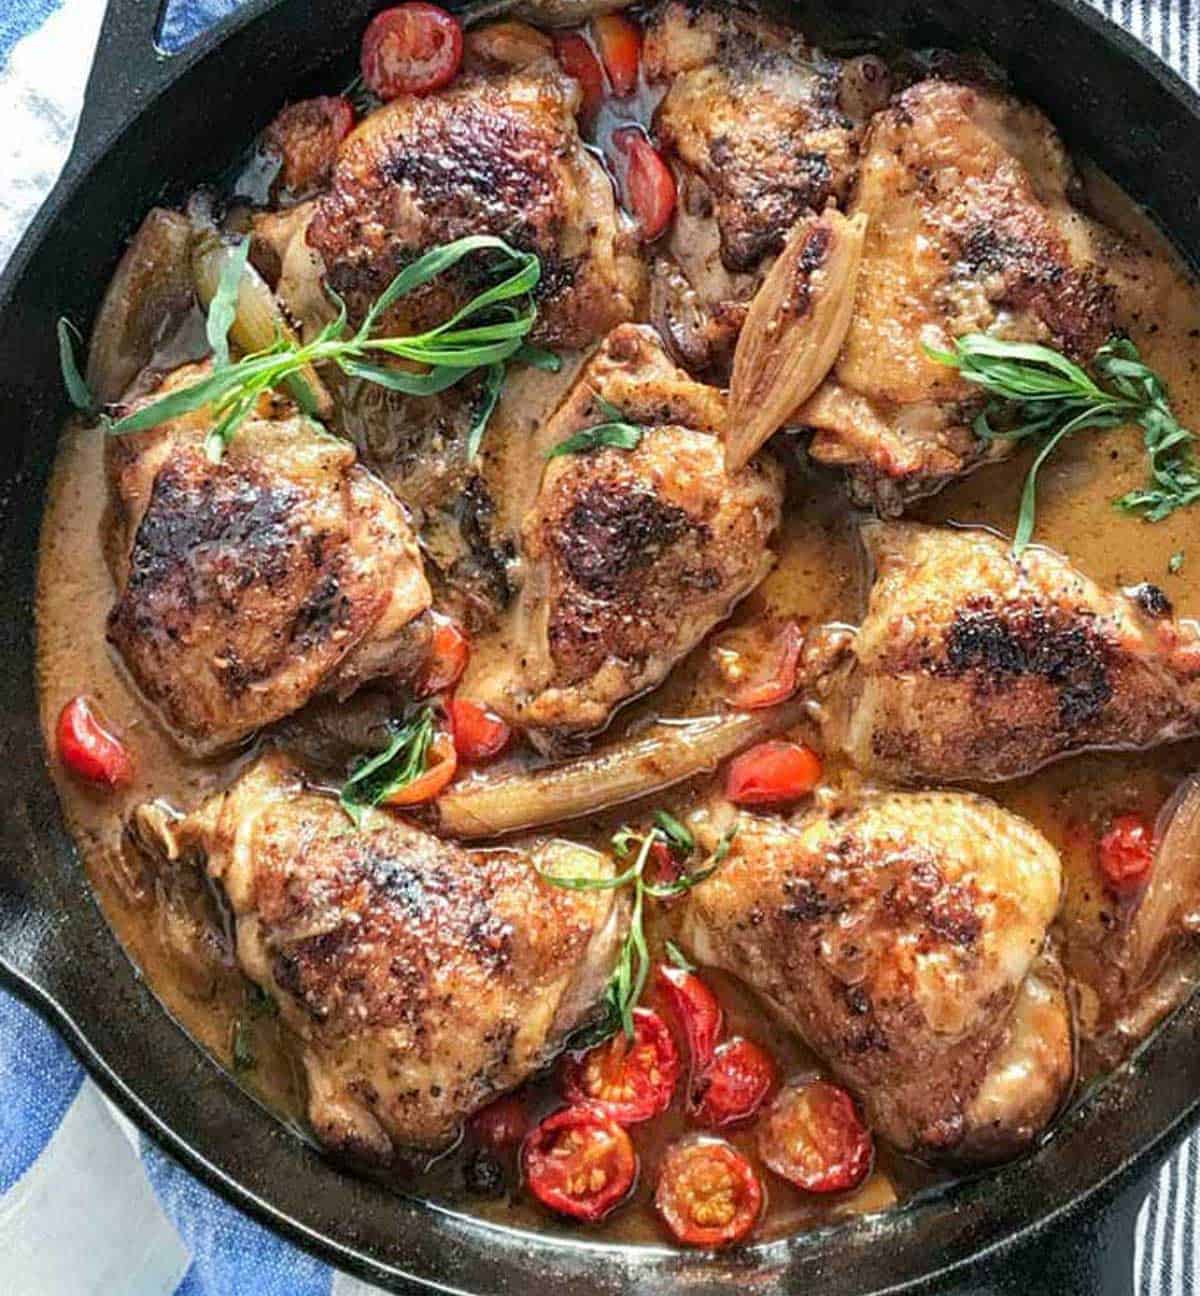 5 braised chicken thighs in a cast iron skillet with cherry tomatoes, shallots and sprigs of tarragon